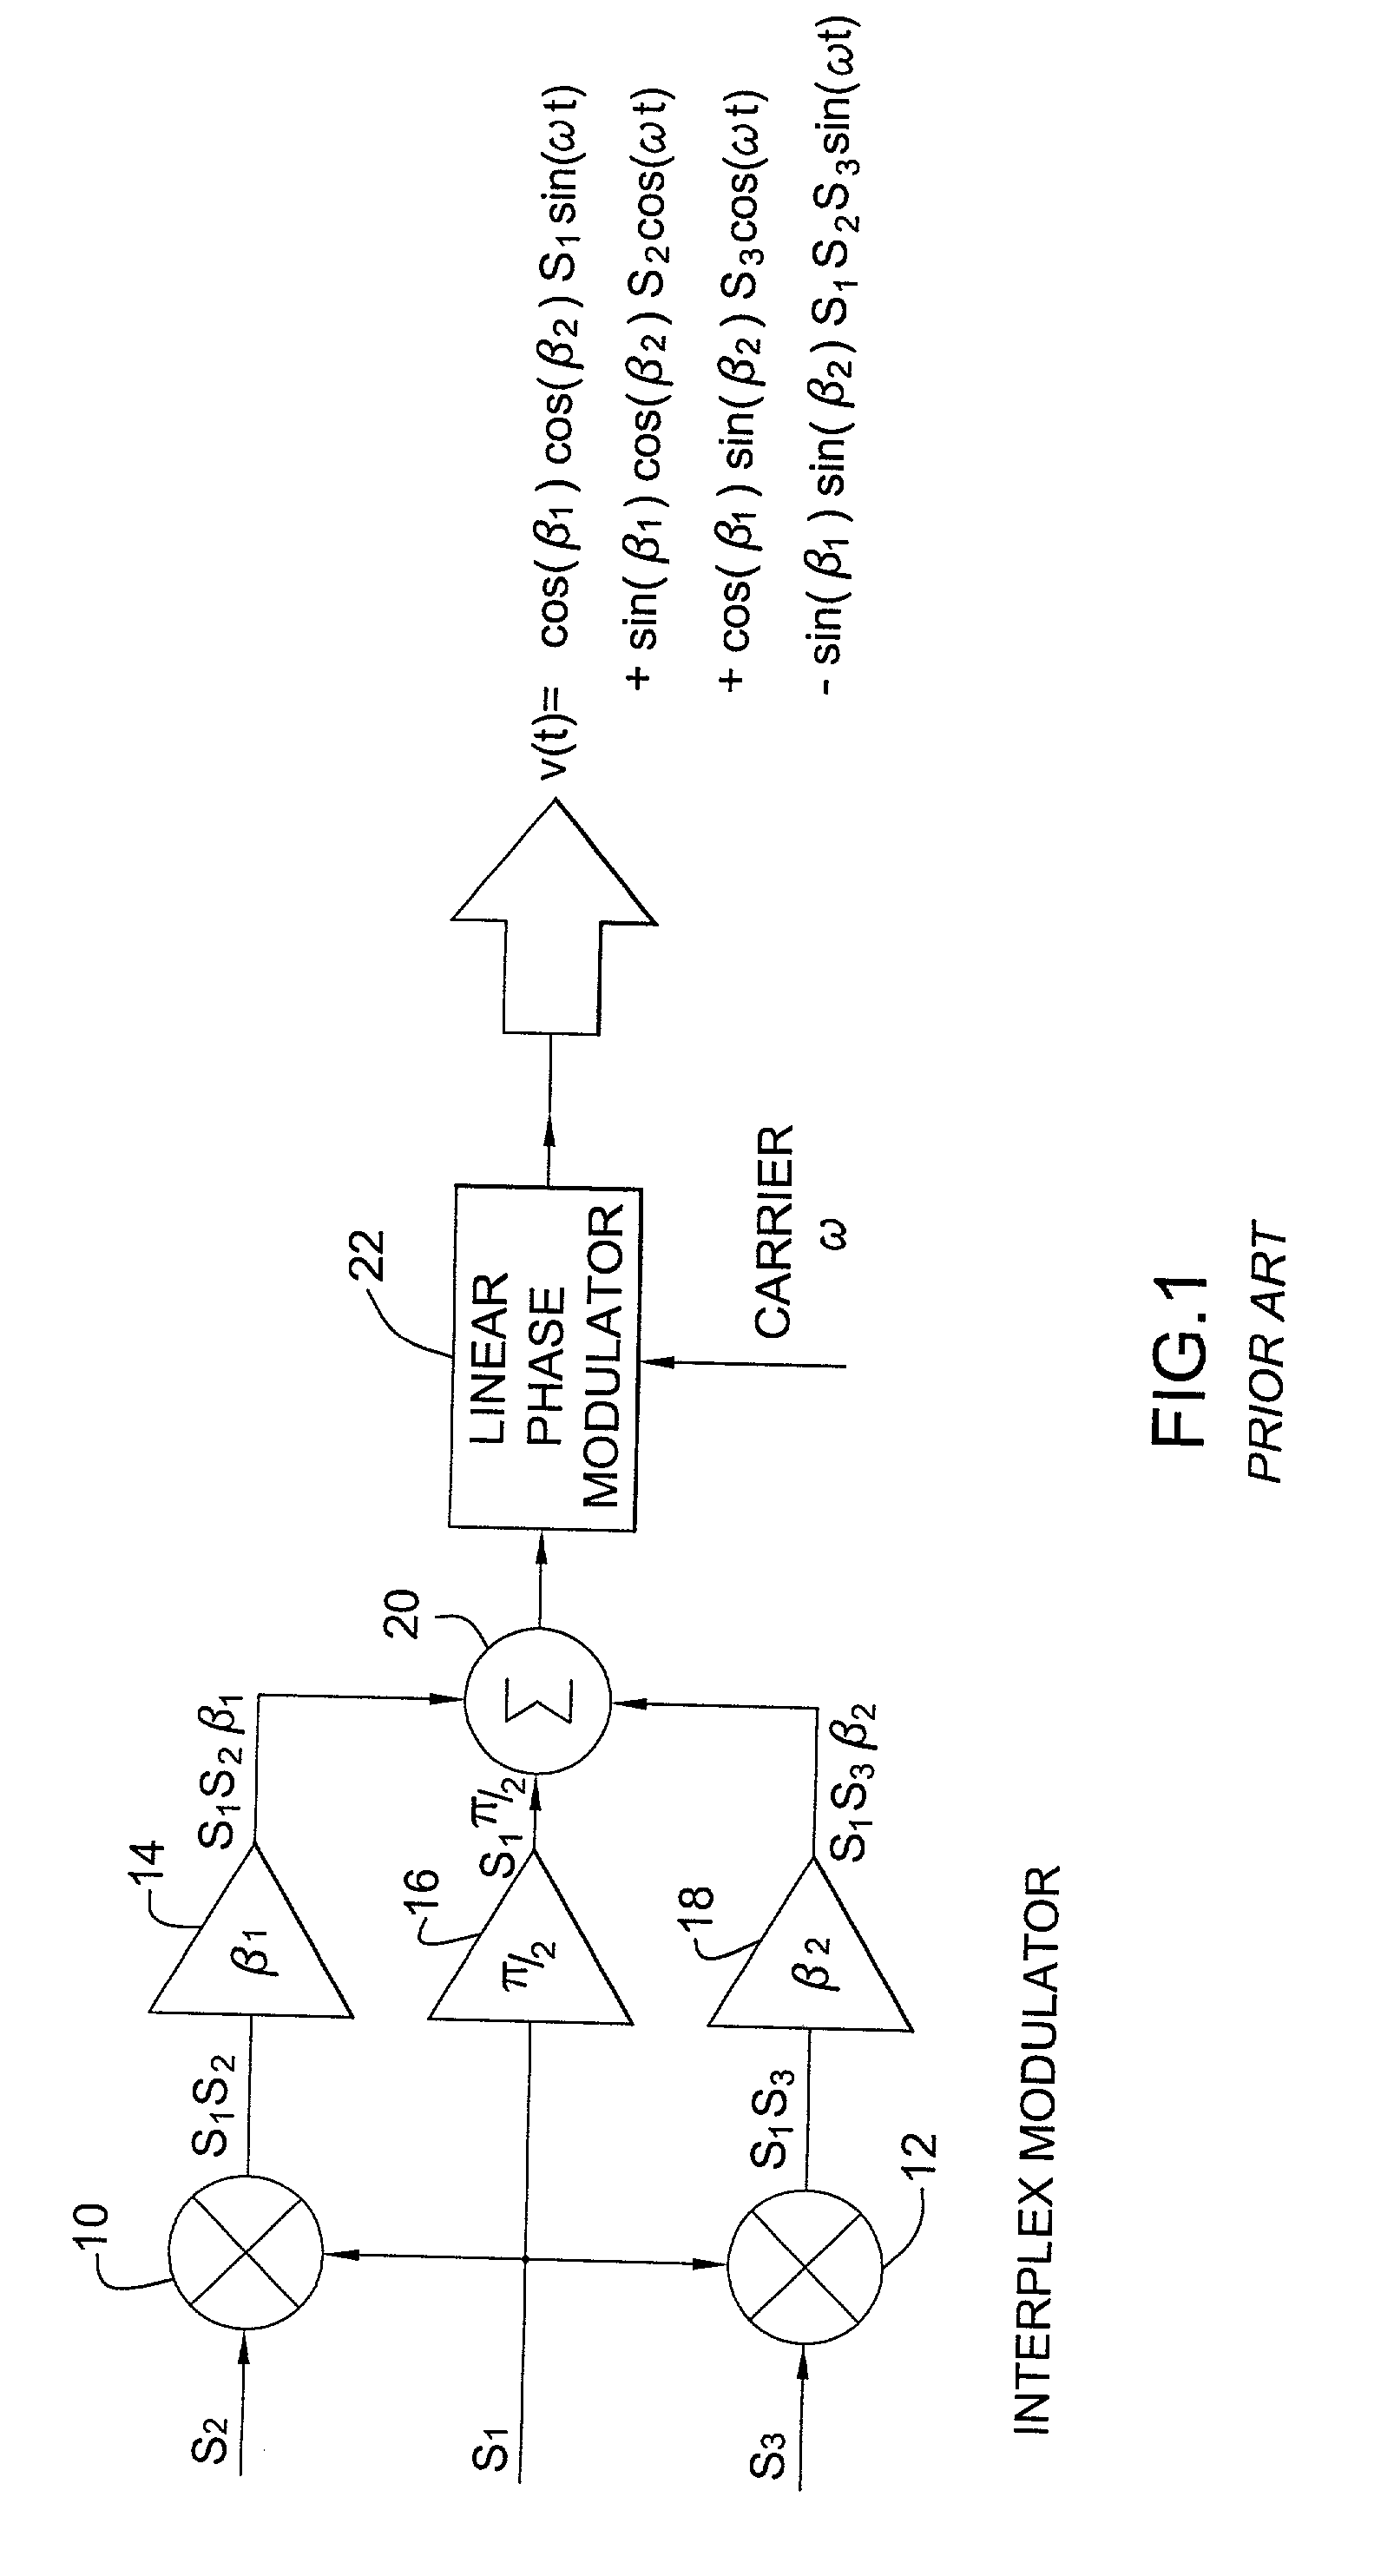 Method and apparatus for generating a composite signal